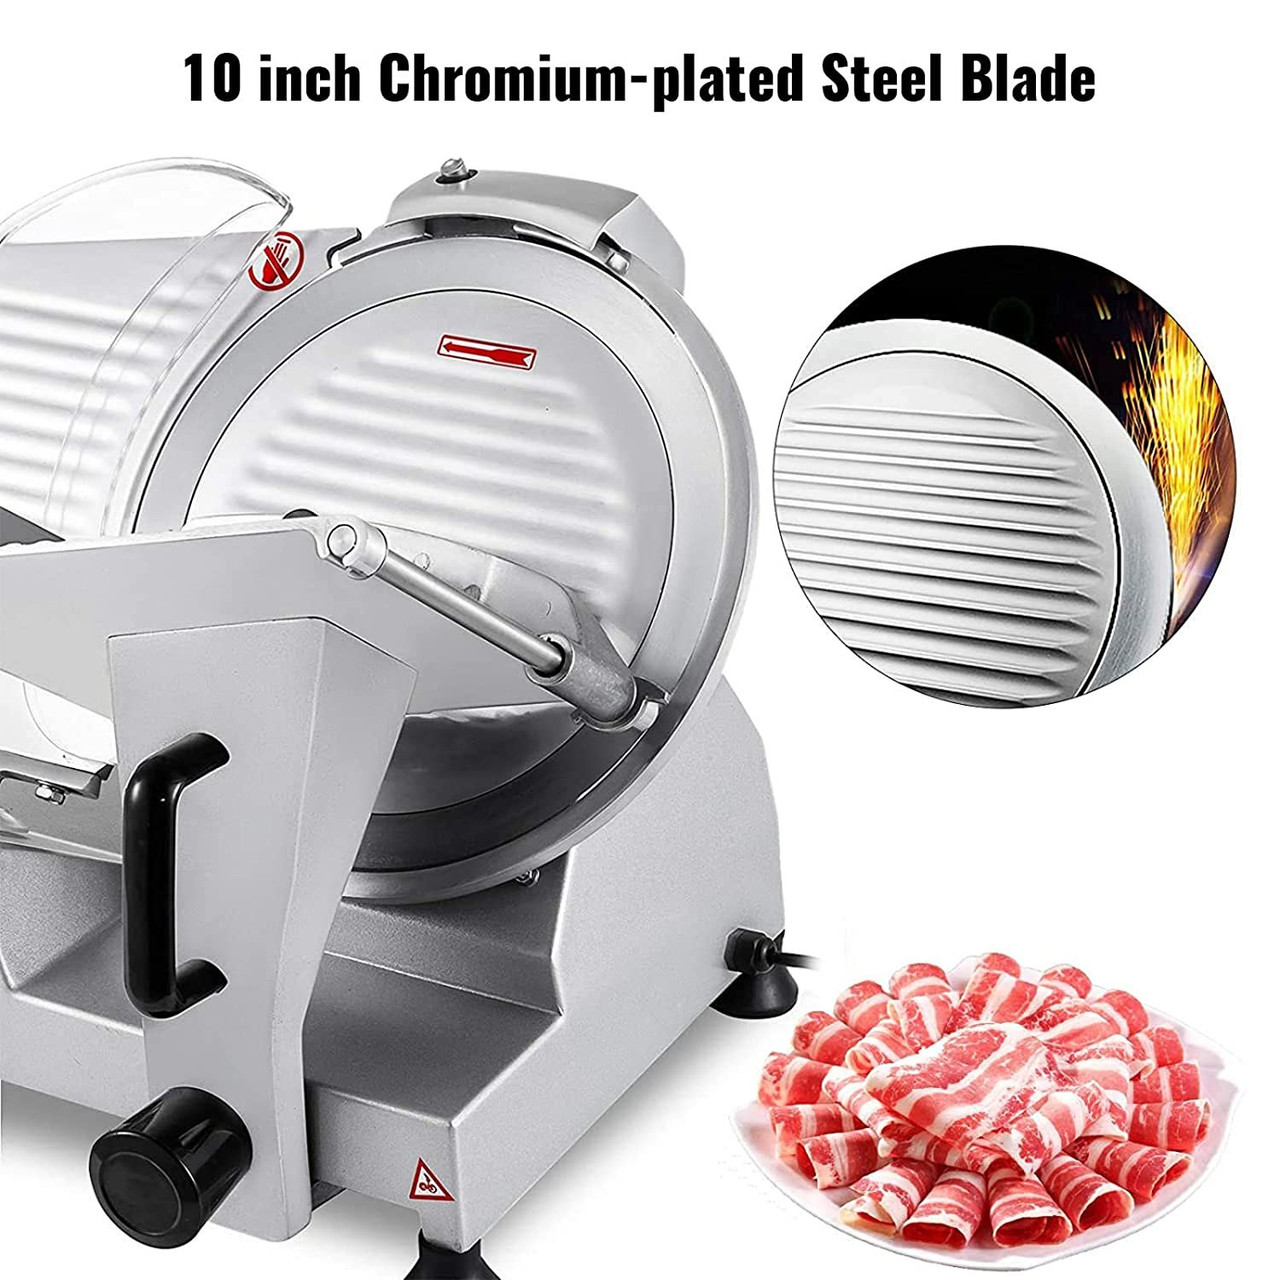 Automatic industrial bread slicer - Face+ - JAC